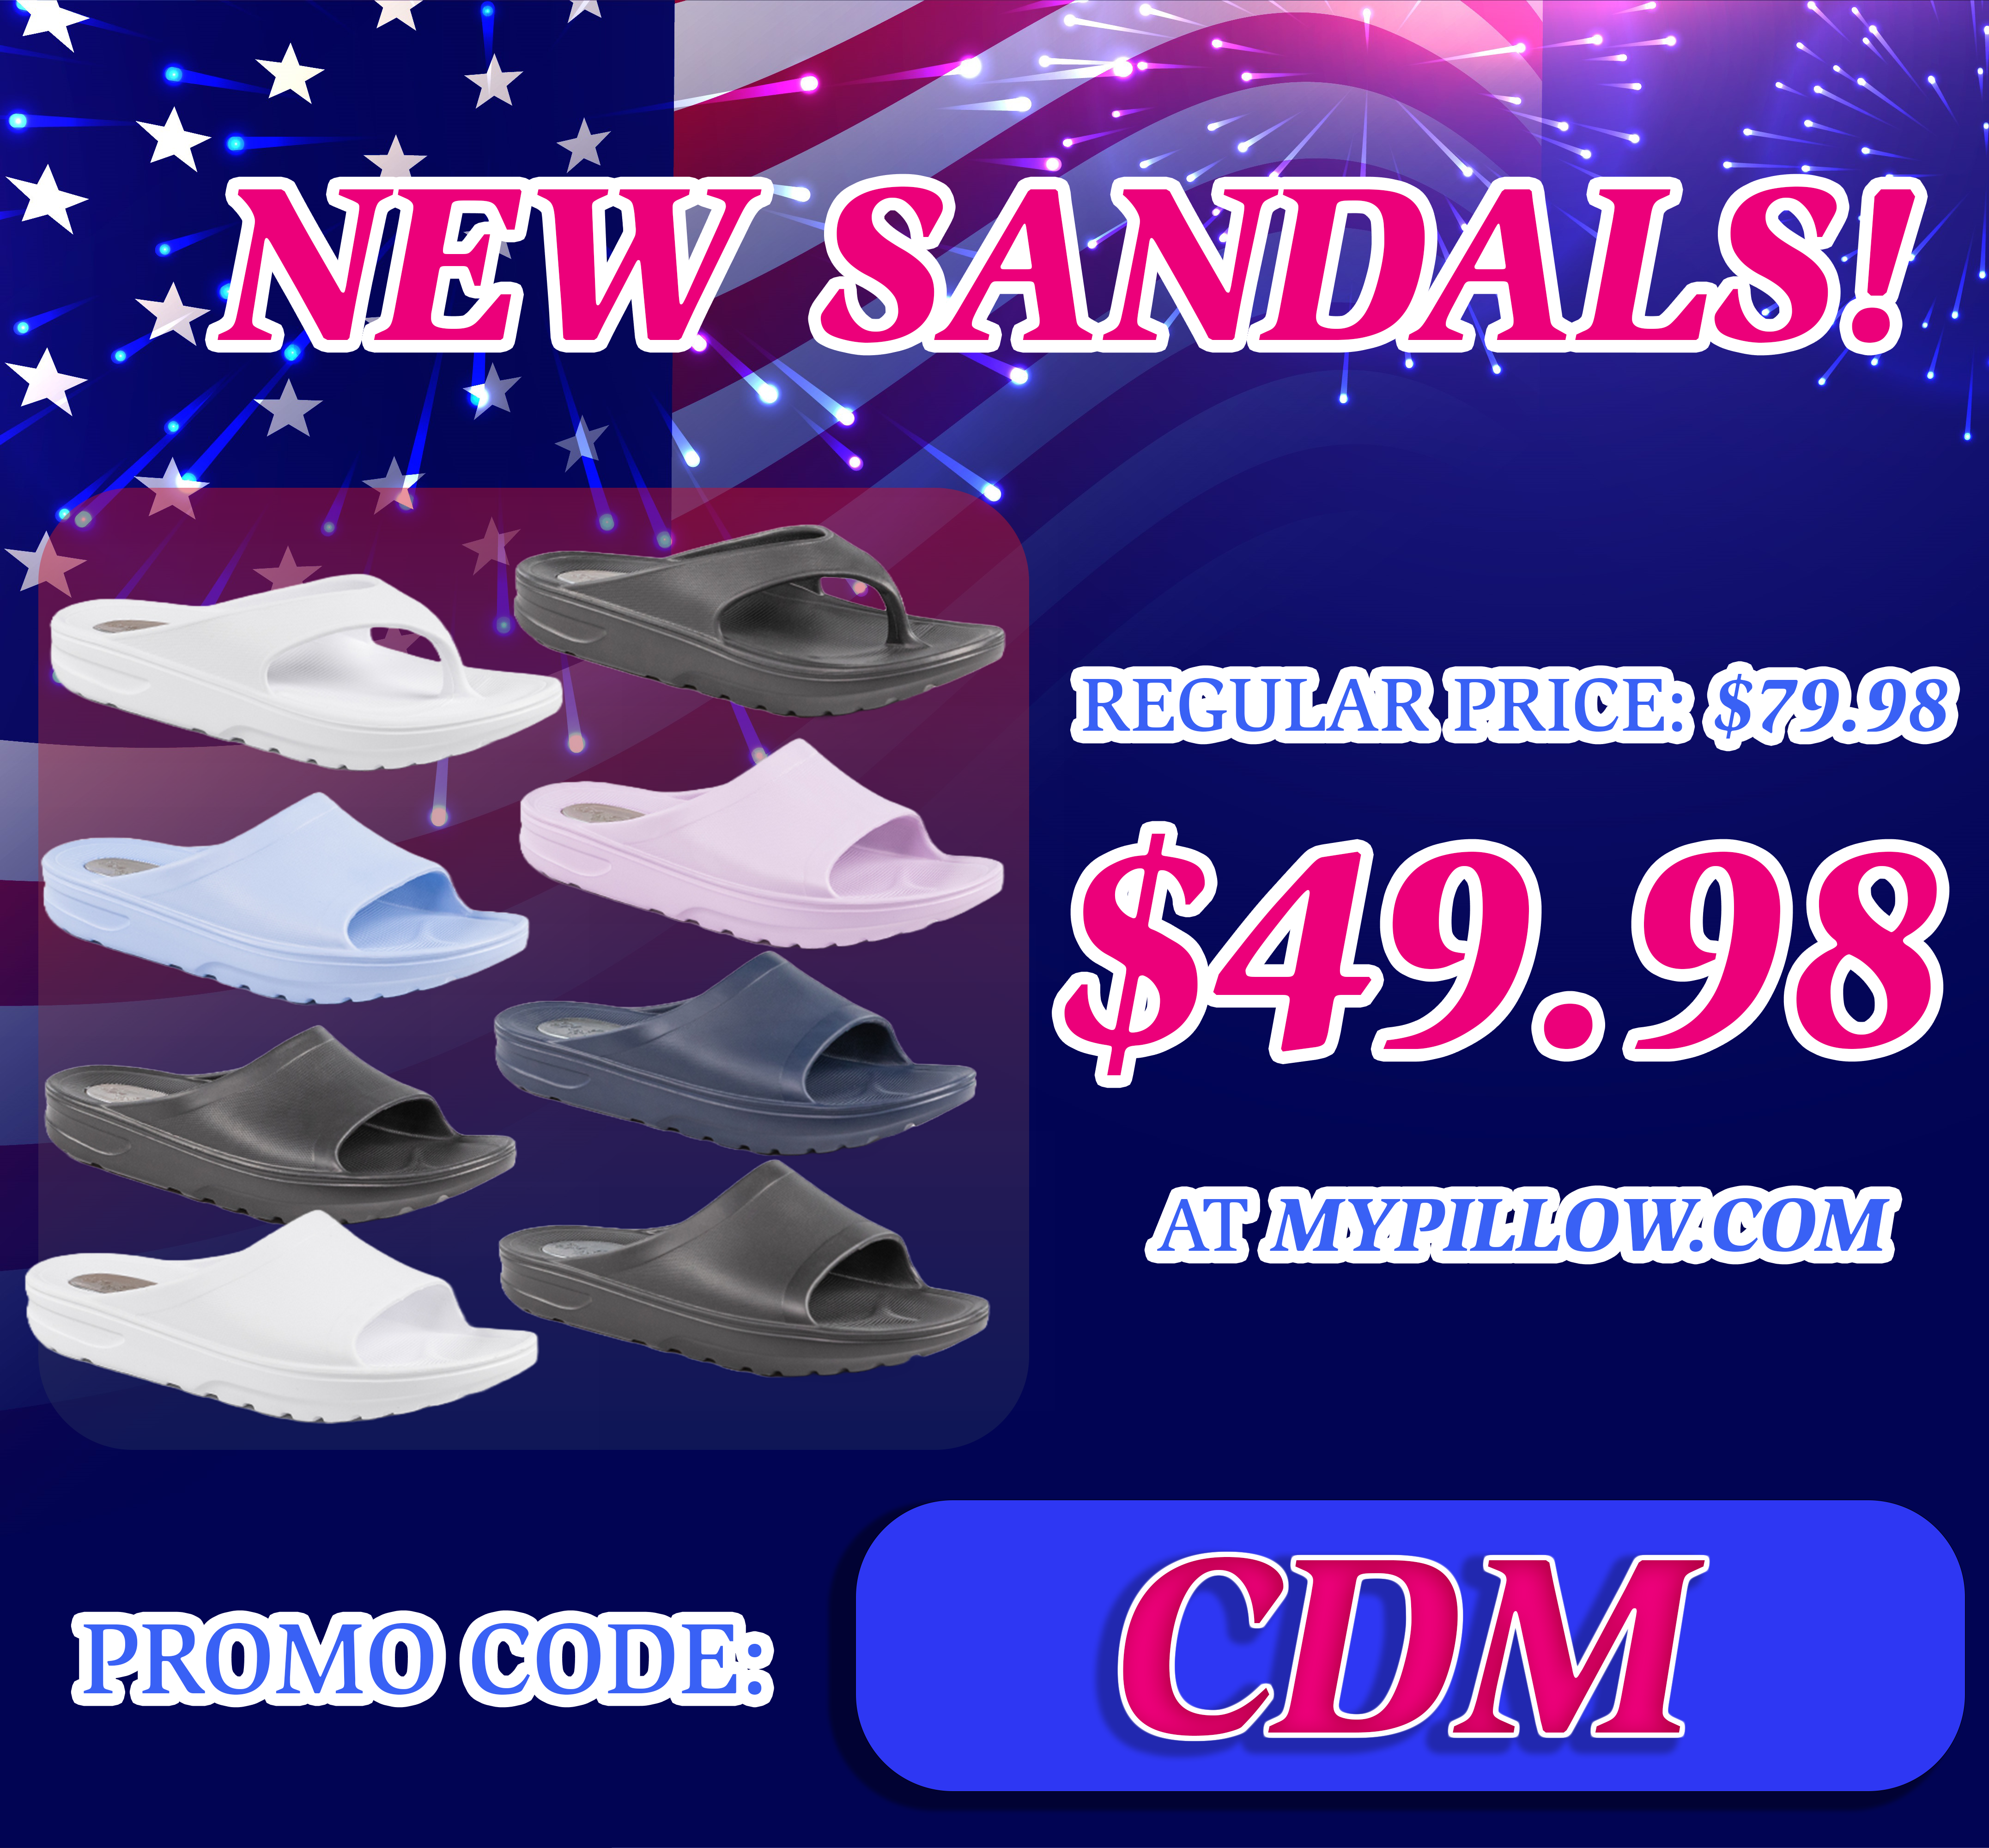 If You Adore MyPillow Slippers, You'll Love The Slide Sandals! Support Mike And The Patriotic Movement!